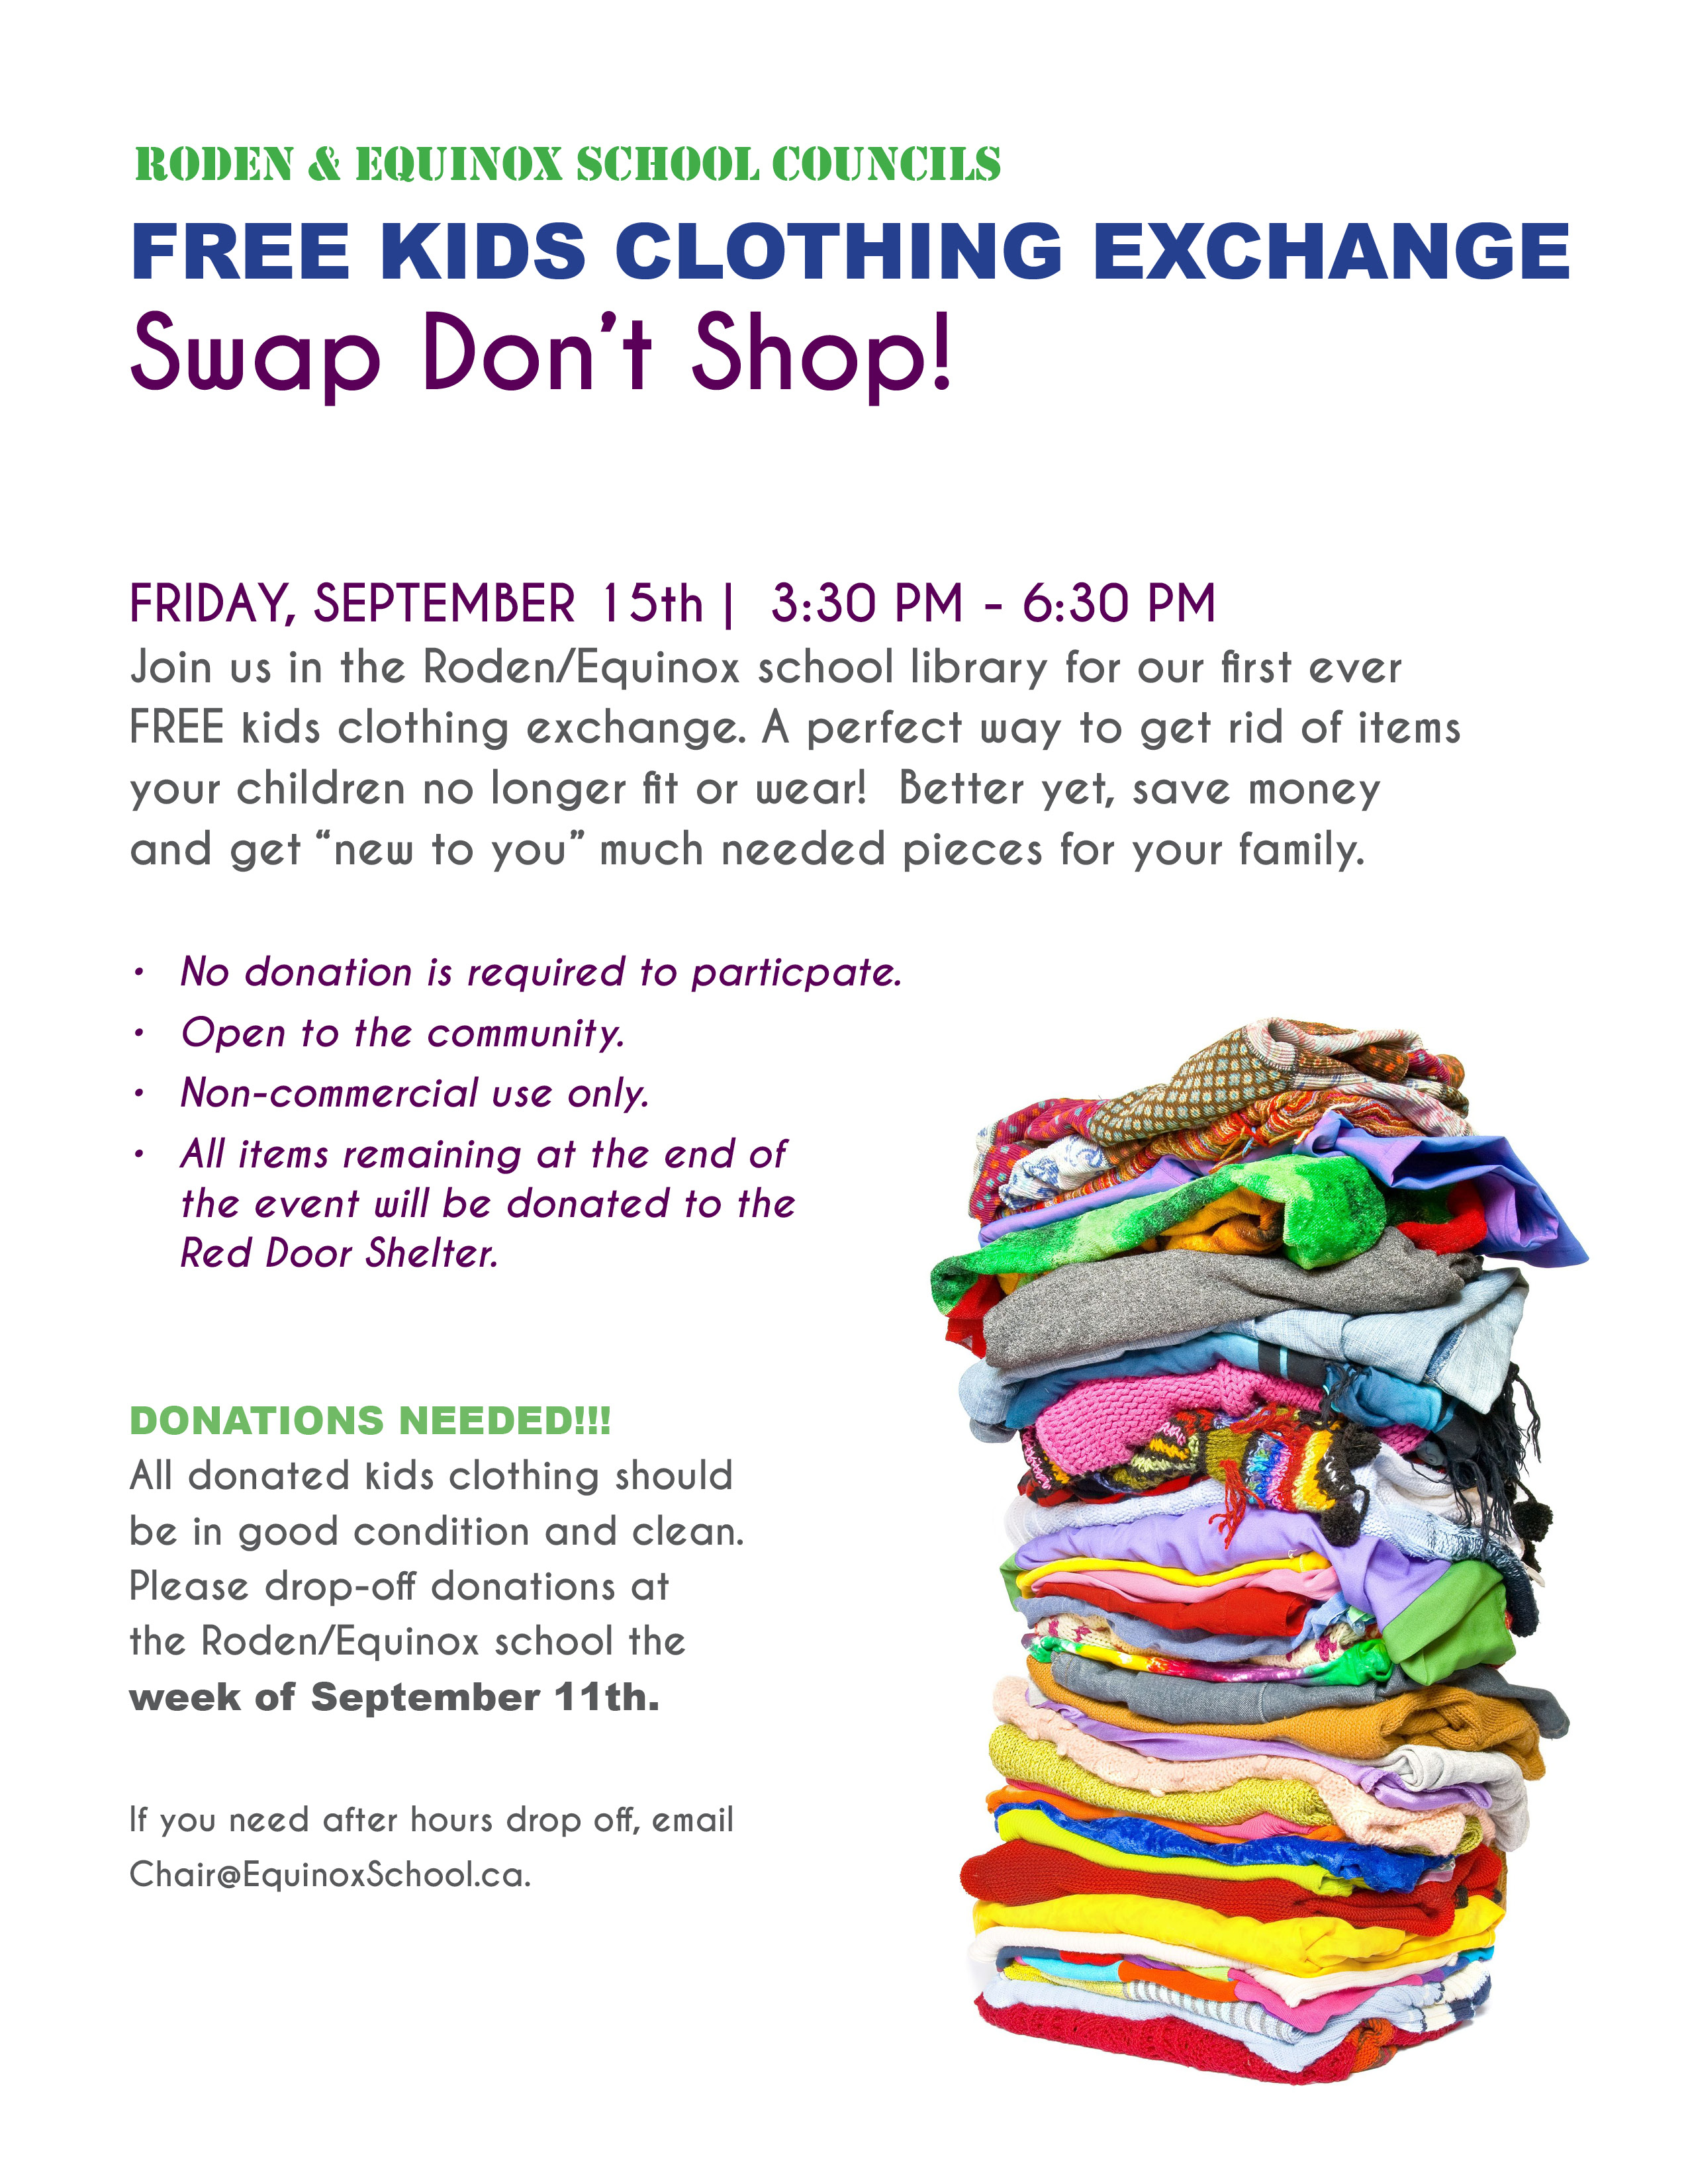 Roden and Equinox School Councils Clothing Exchange September 15 2017